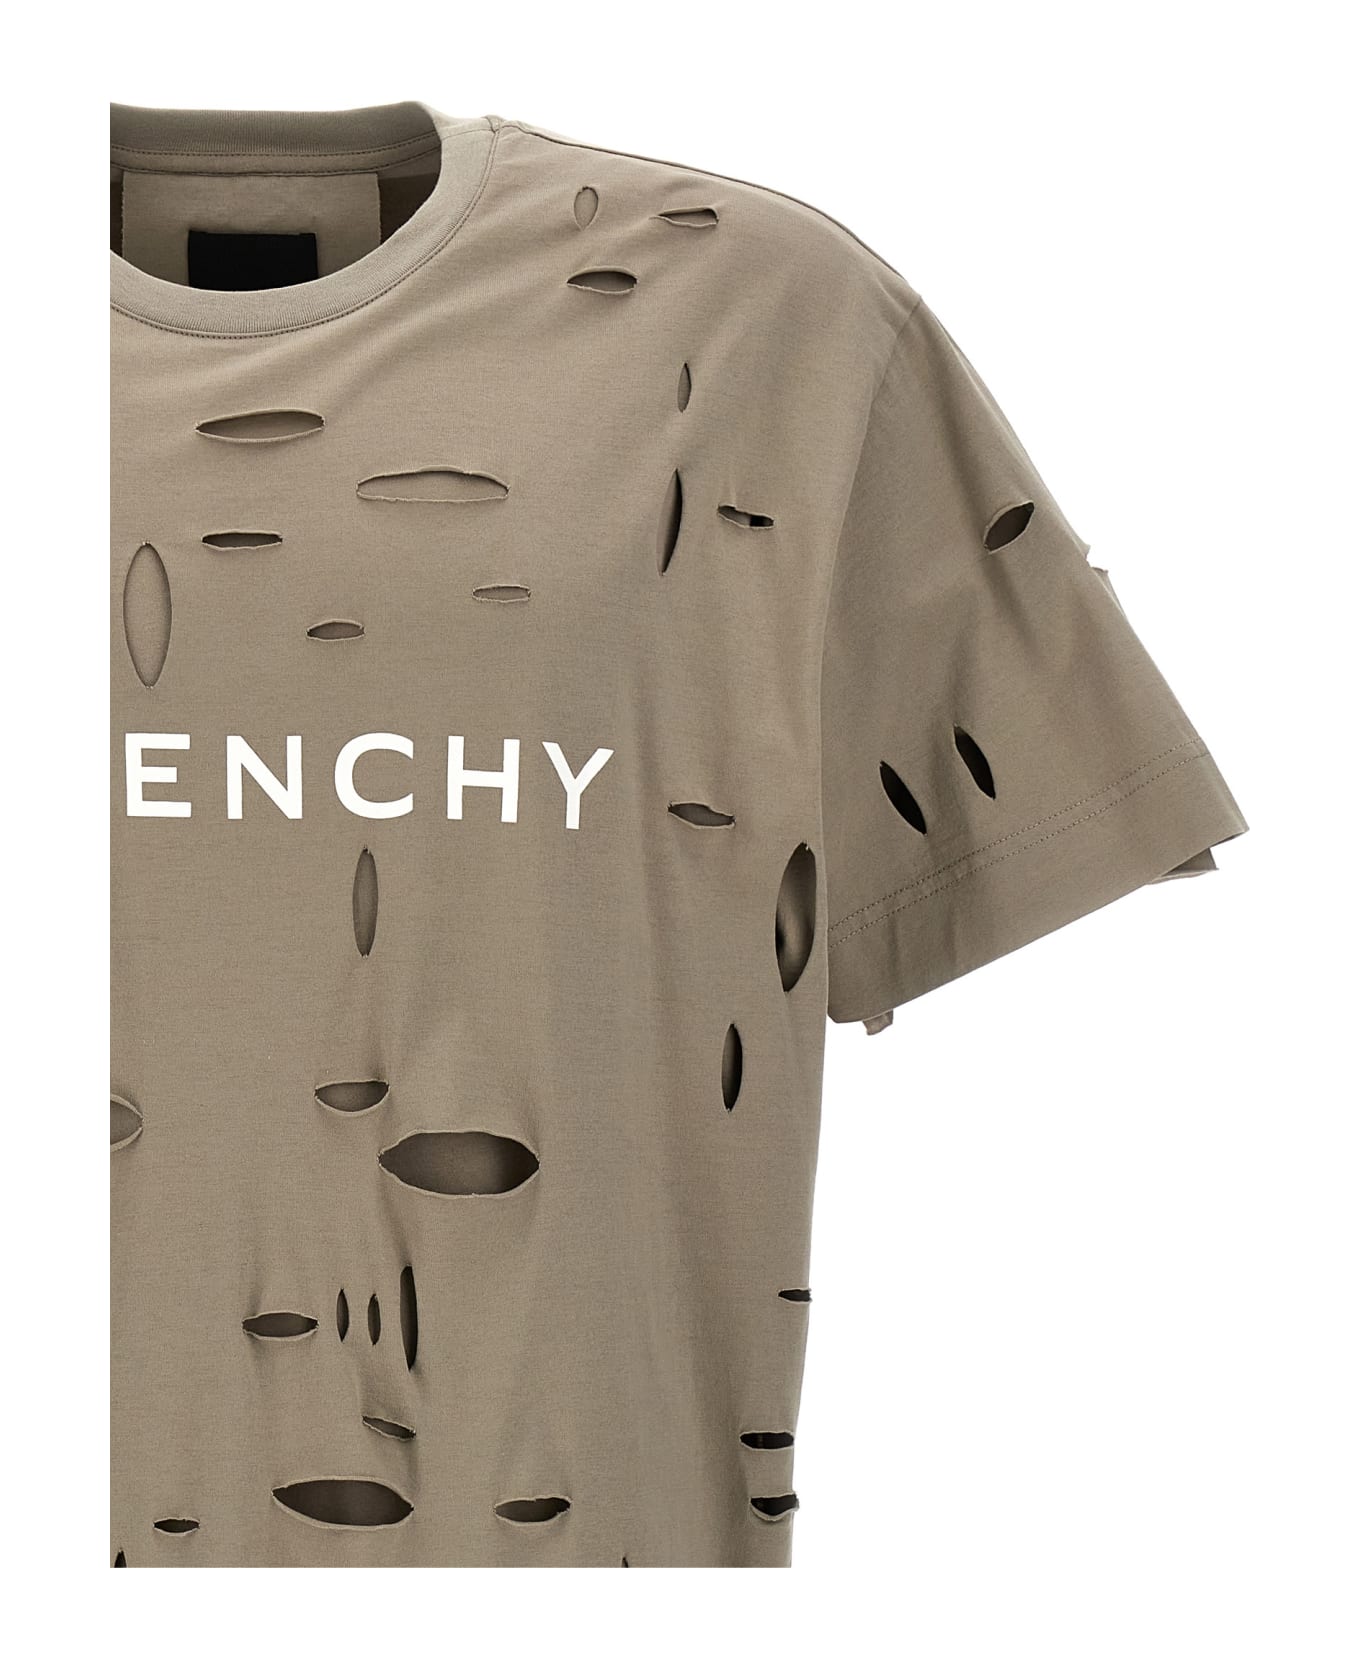 Givenchy Distressed Crewneck T-shirt - Beige